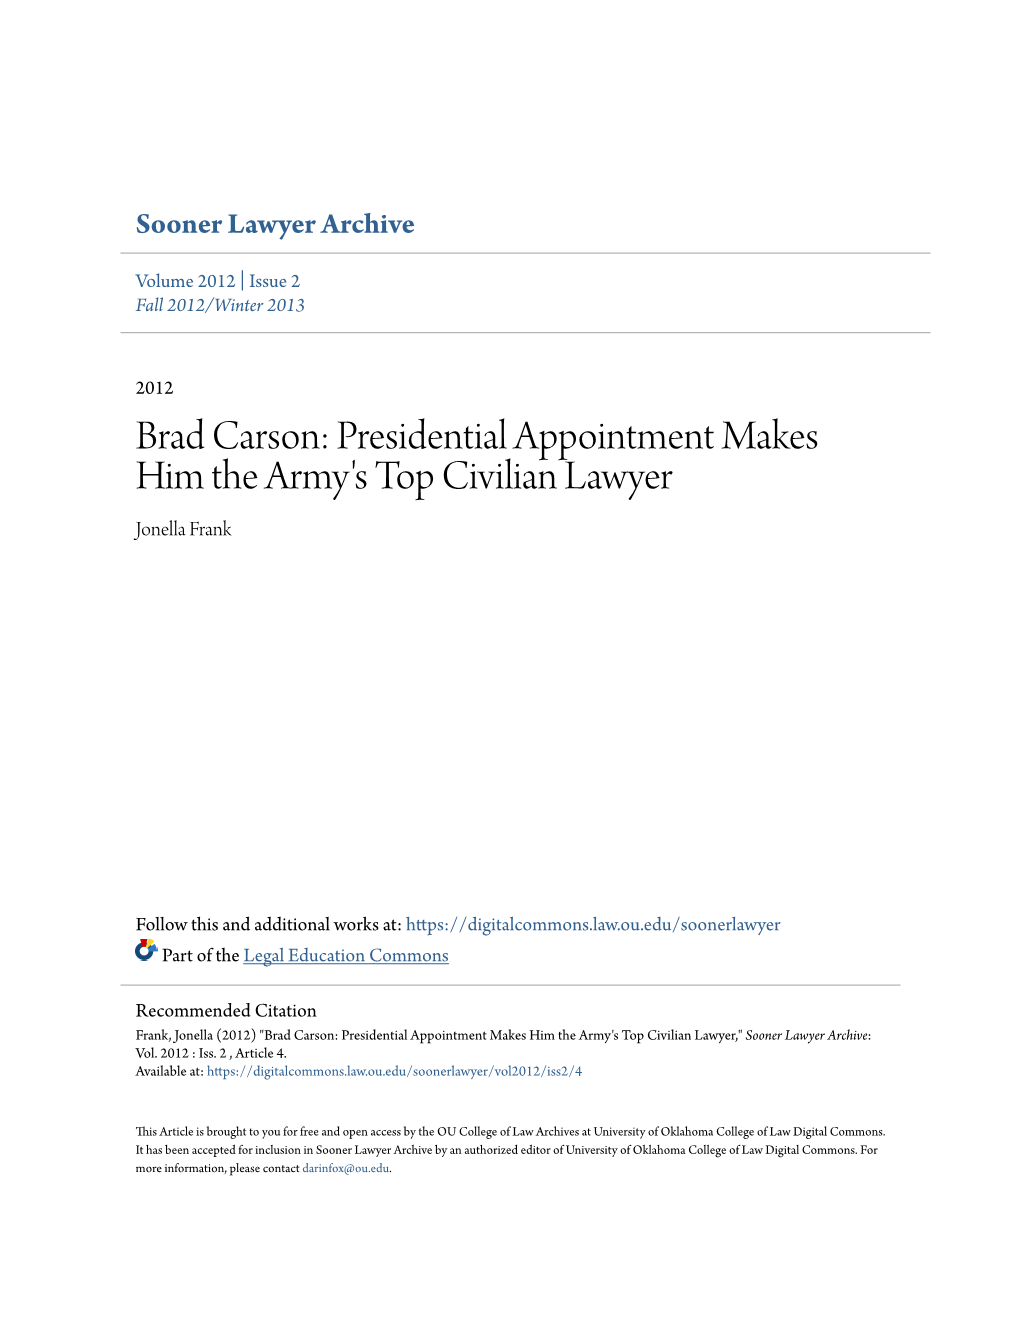 Brad Carson: Presidential Appointment Makes Him the Army's Top Civilian Lawyer Jonella Frank